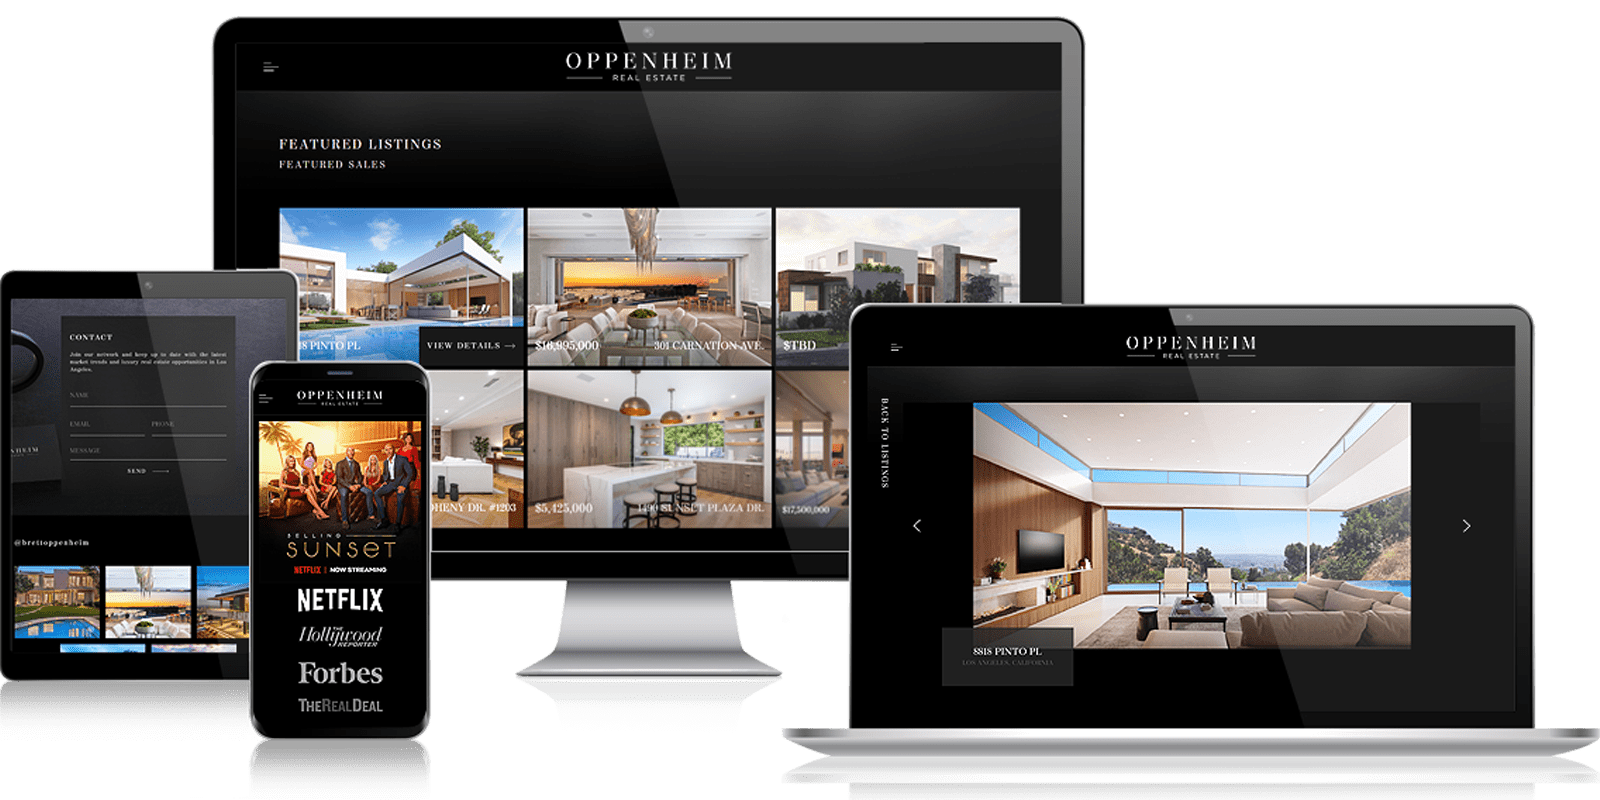 Oppenheim Real Estate website on PC, laptop, tablet, and mobile